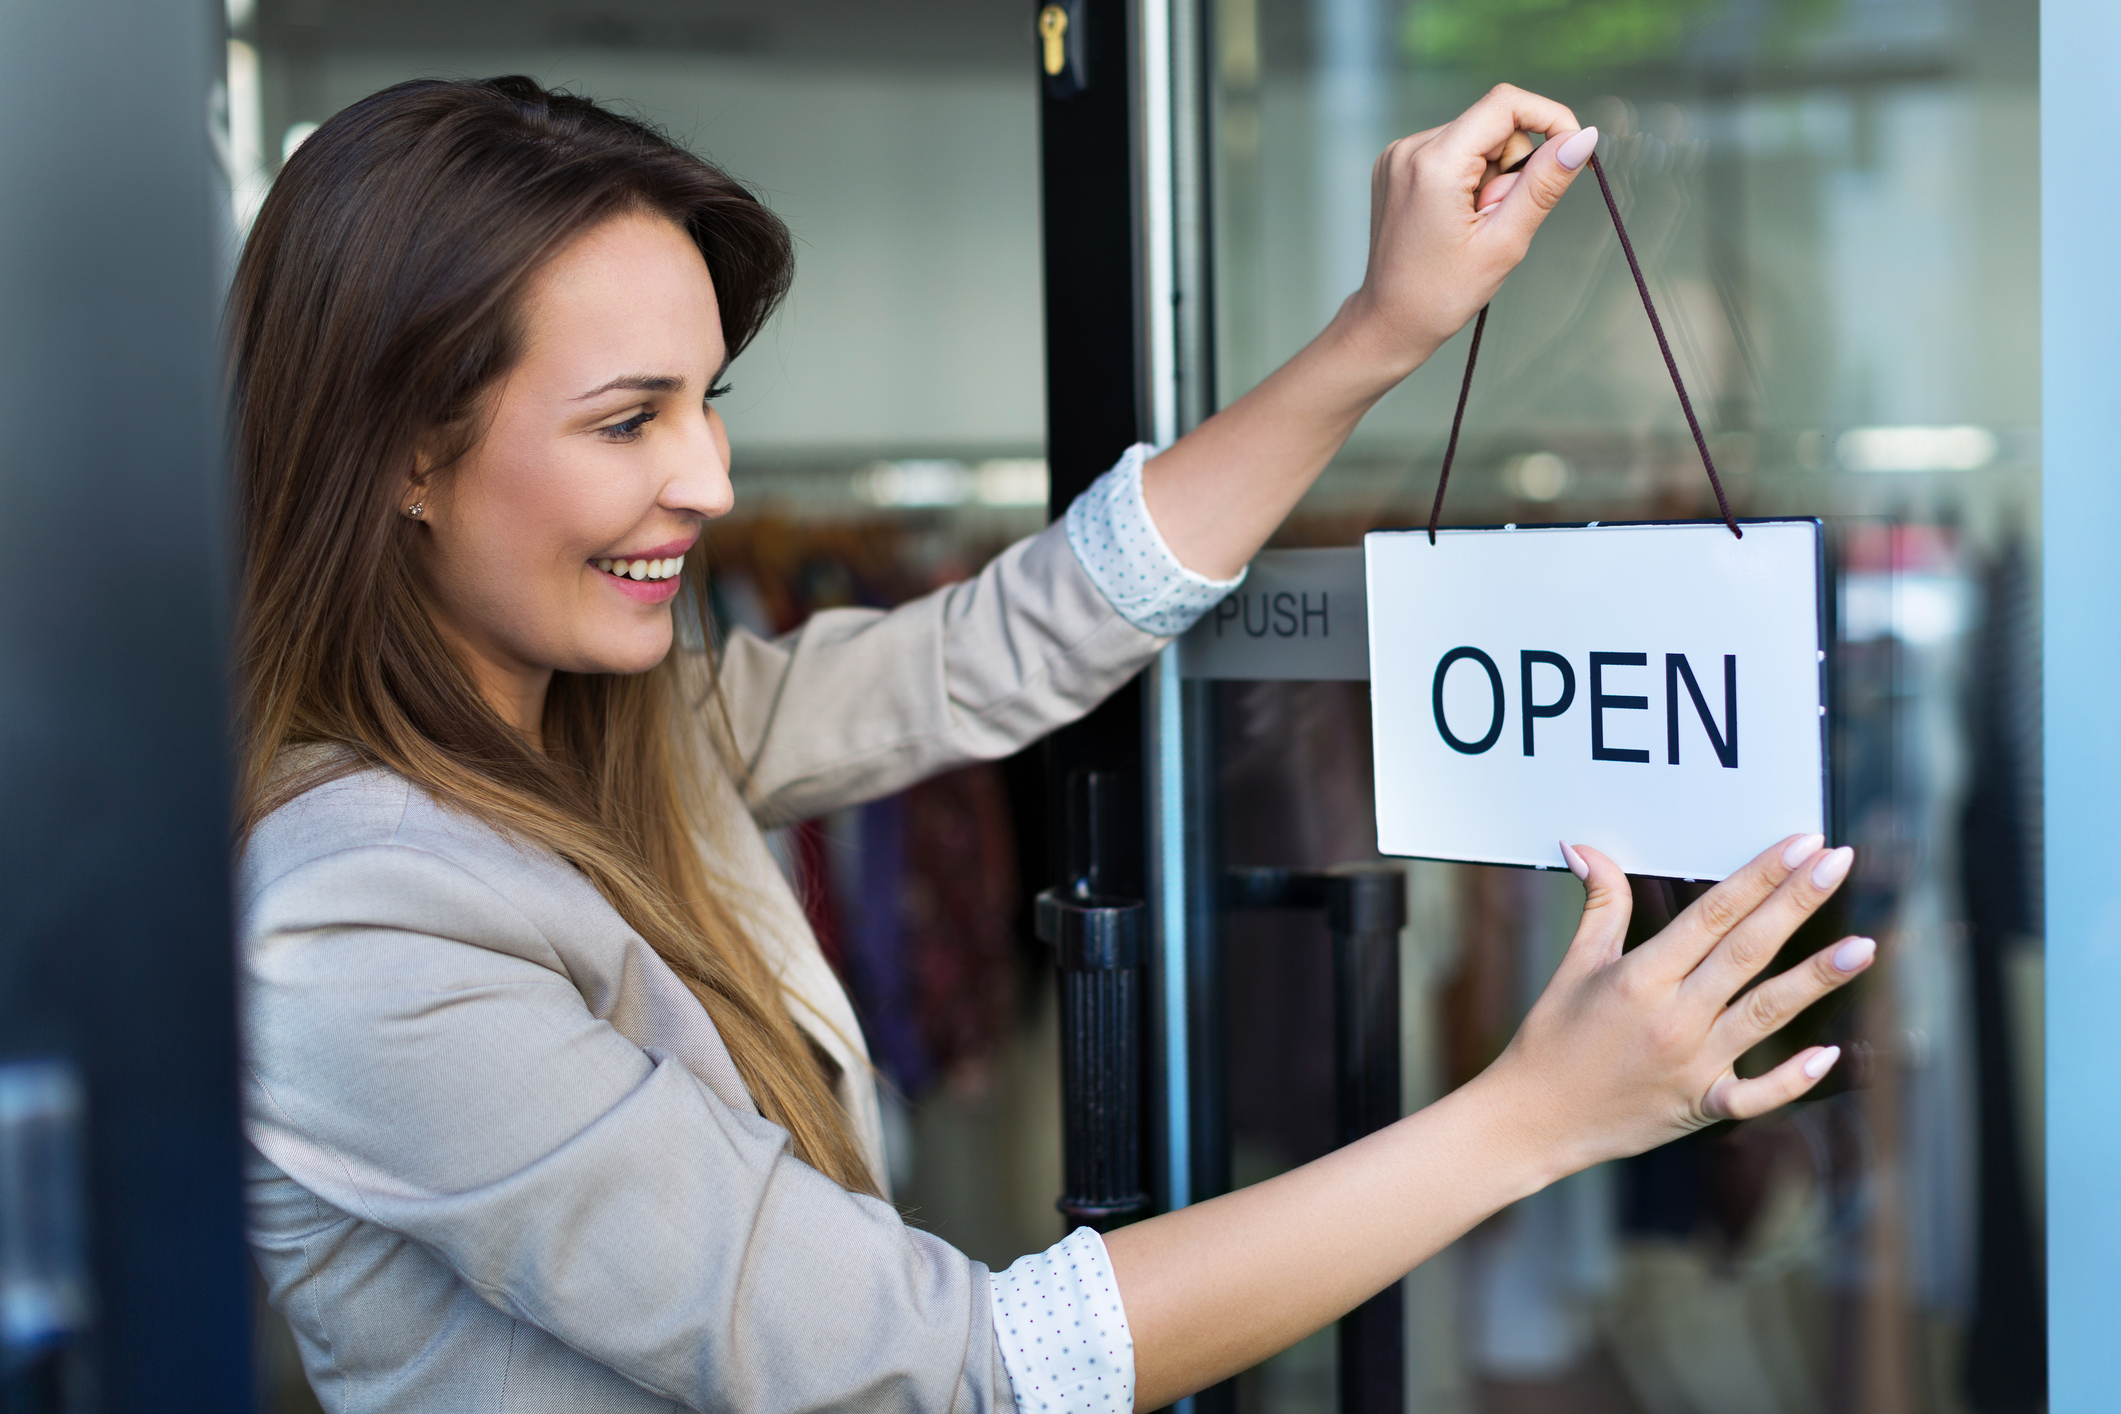 New business owner opens store for the first time. Does she have the right business insurance?